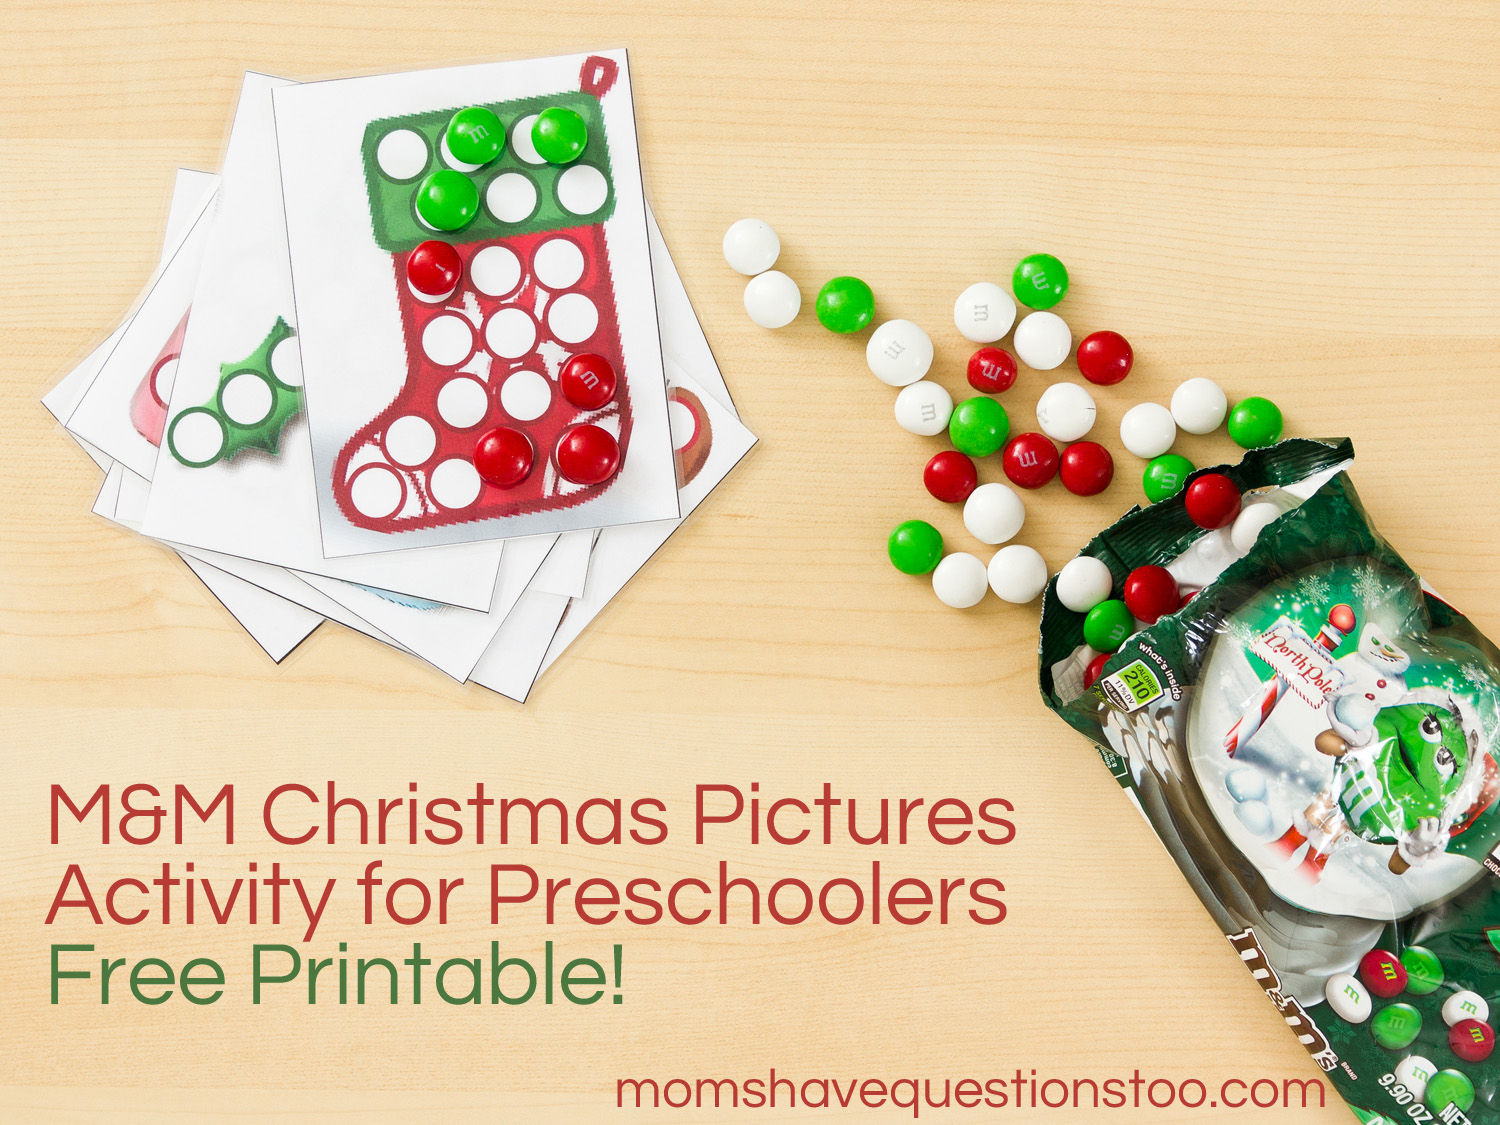 M&M Christmas Pictures Activity - Moms Have Questions Too